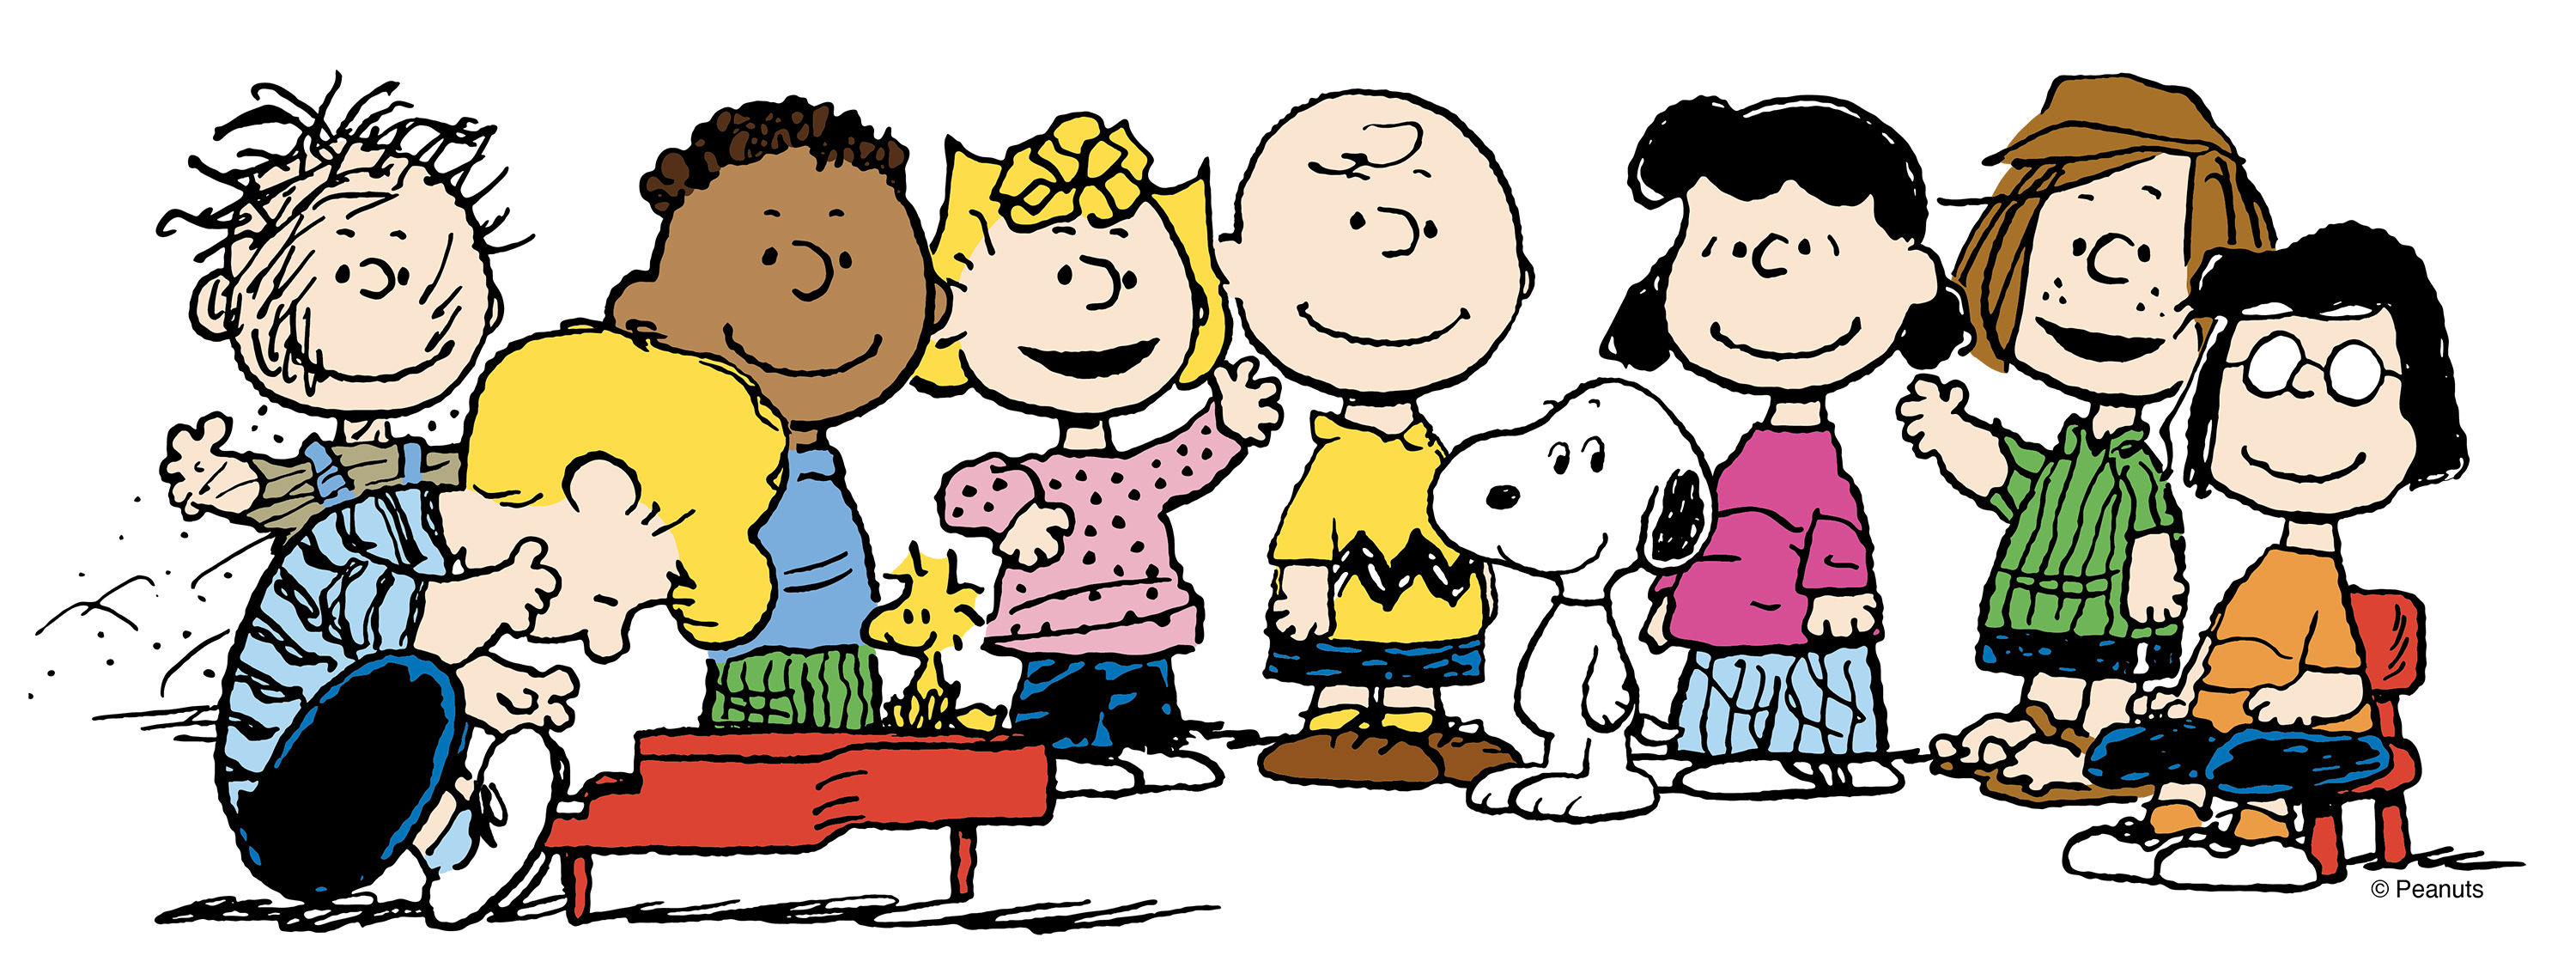 The Peanuts Comic Strip characters, including Snoopy the dog and facing forward.   There are also yellow, blue, and red birthday balloons on the right side.